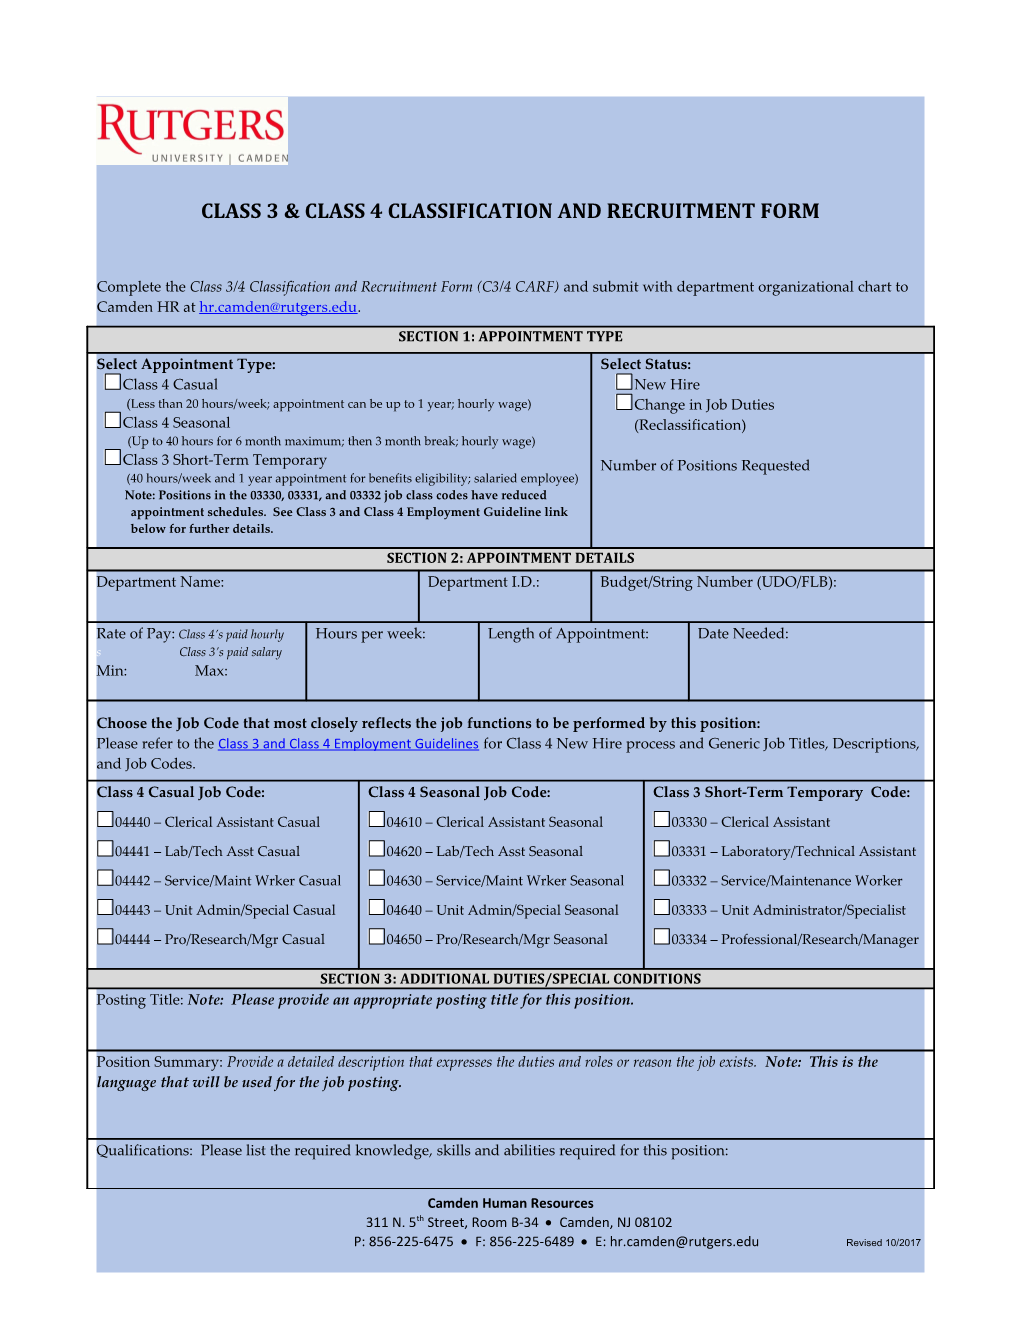 Class 3 & Class 4 Classification and Recruitment Form